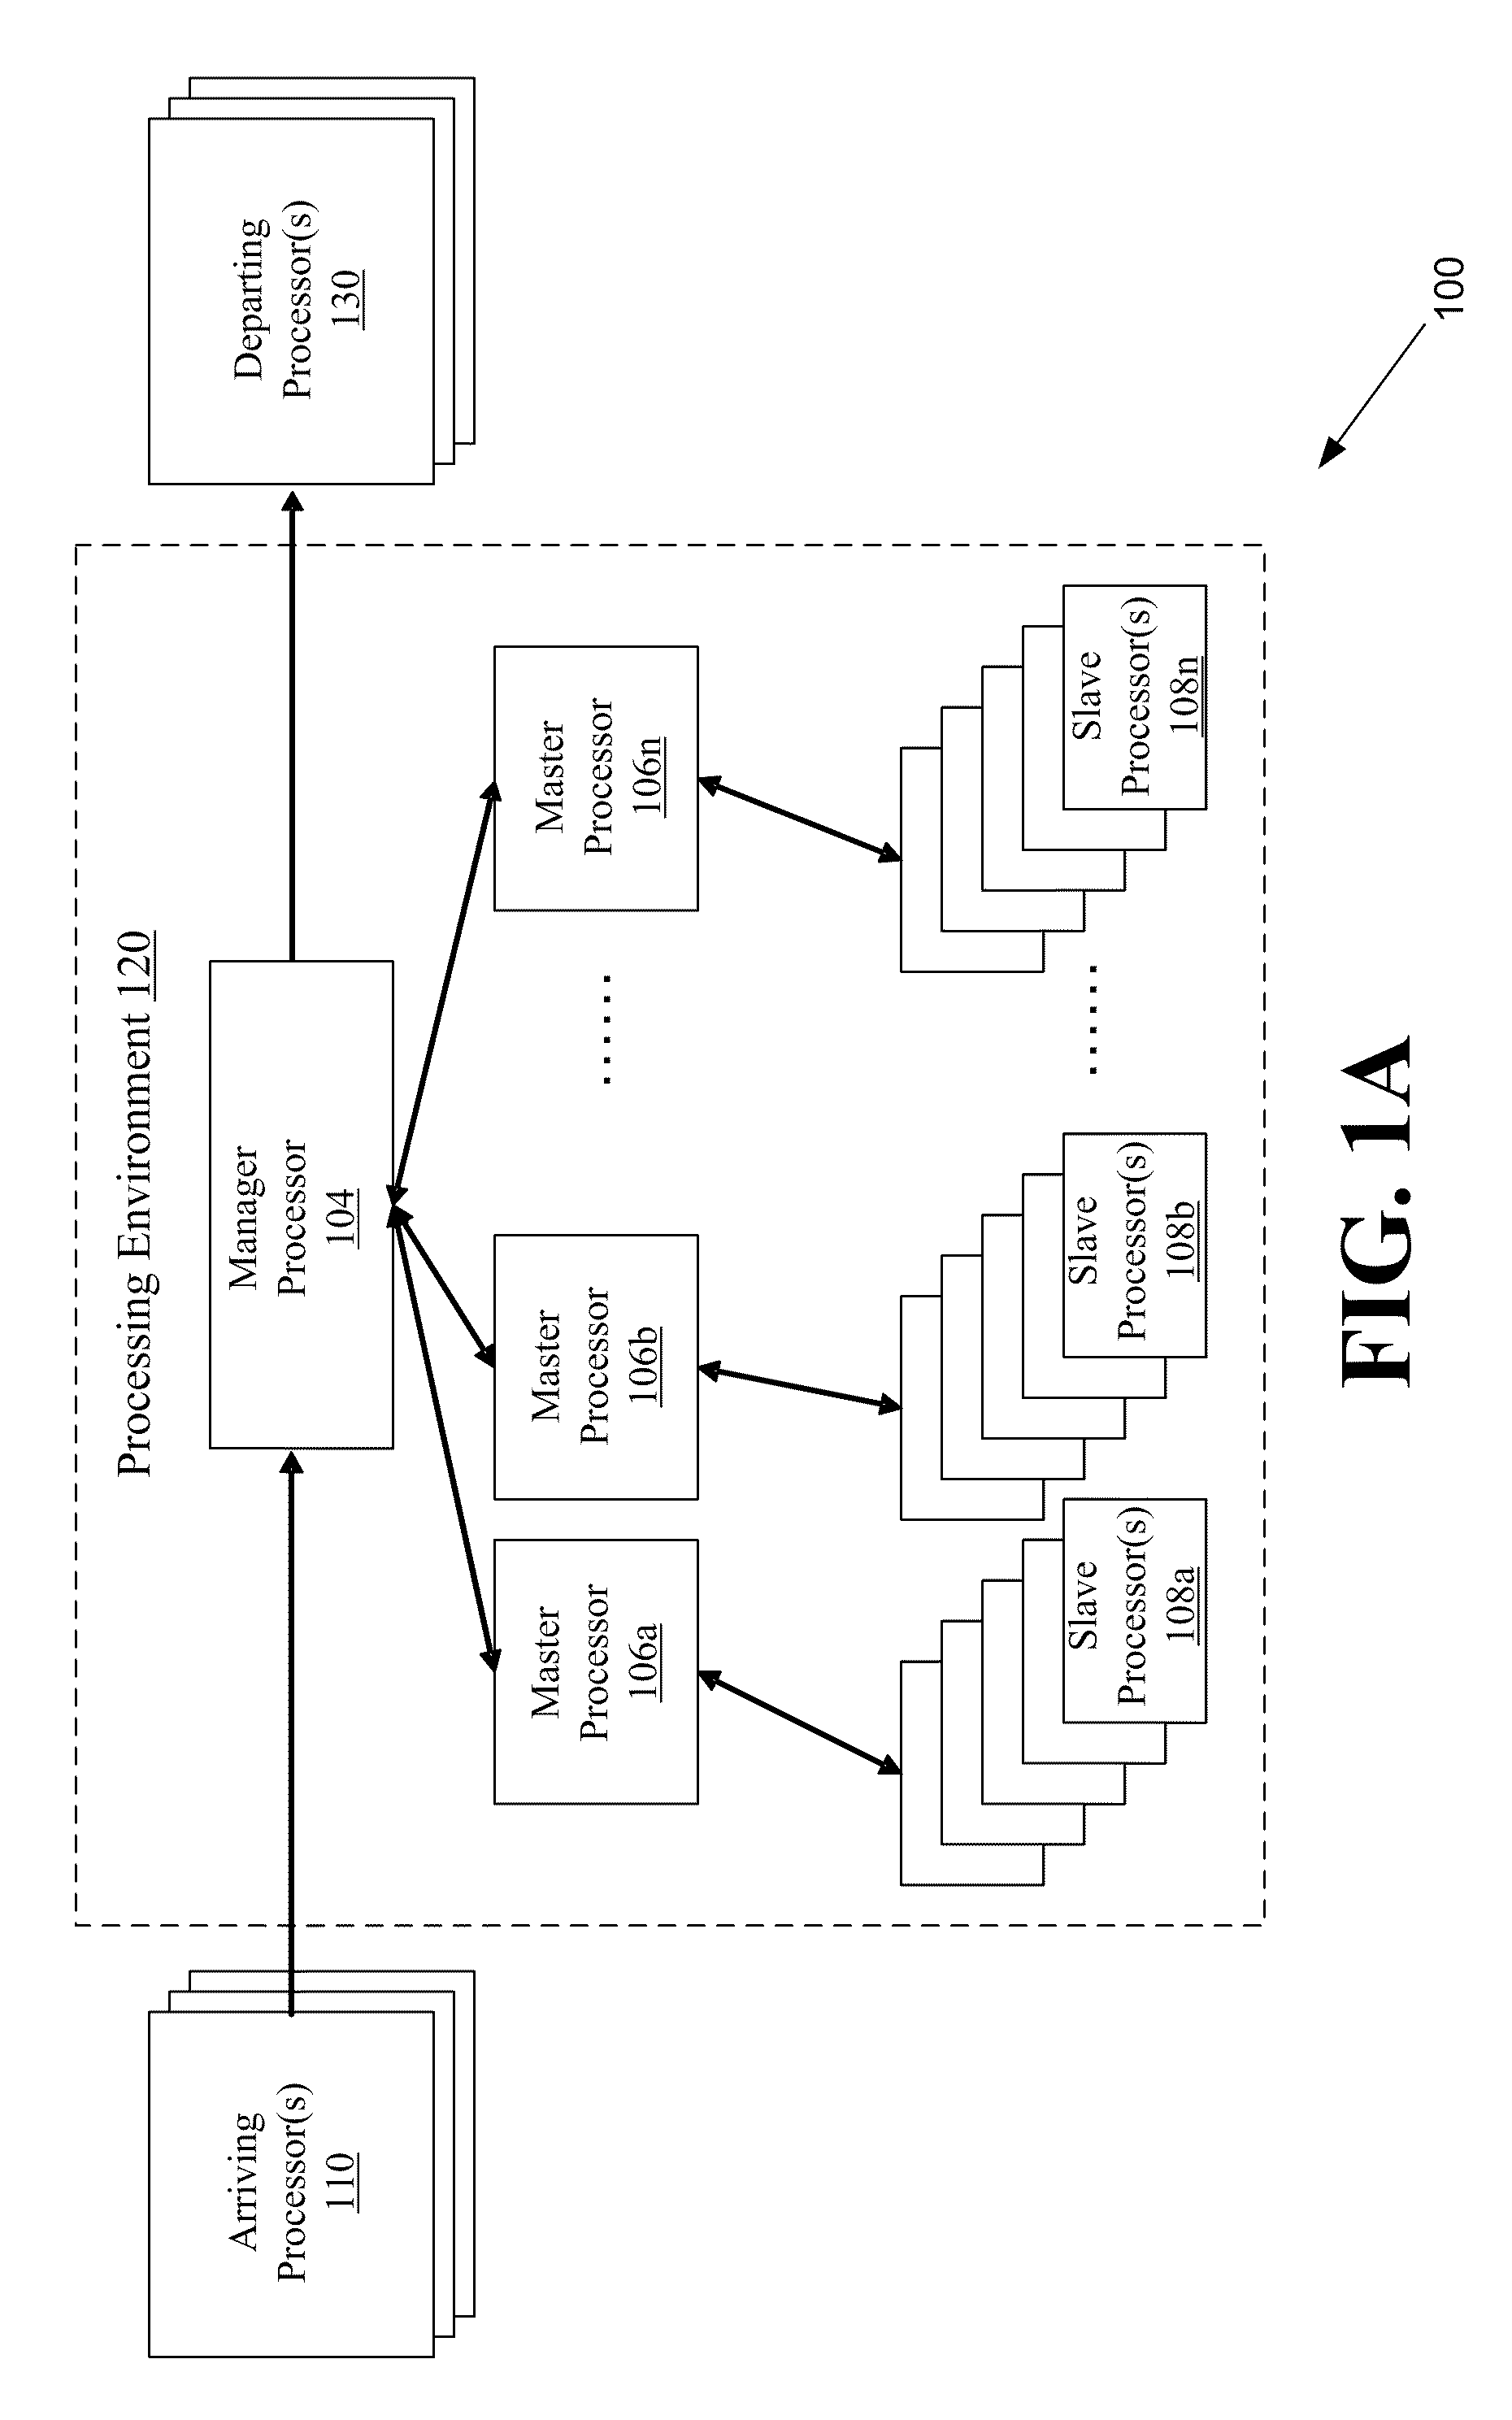 Systems and methods for an application program interface to an evolutionary software program